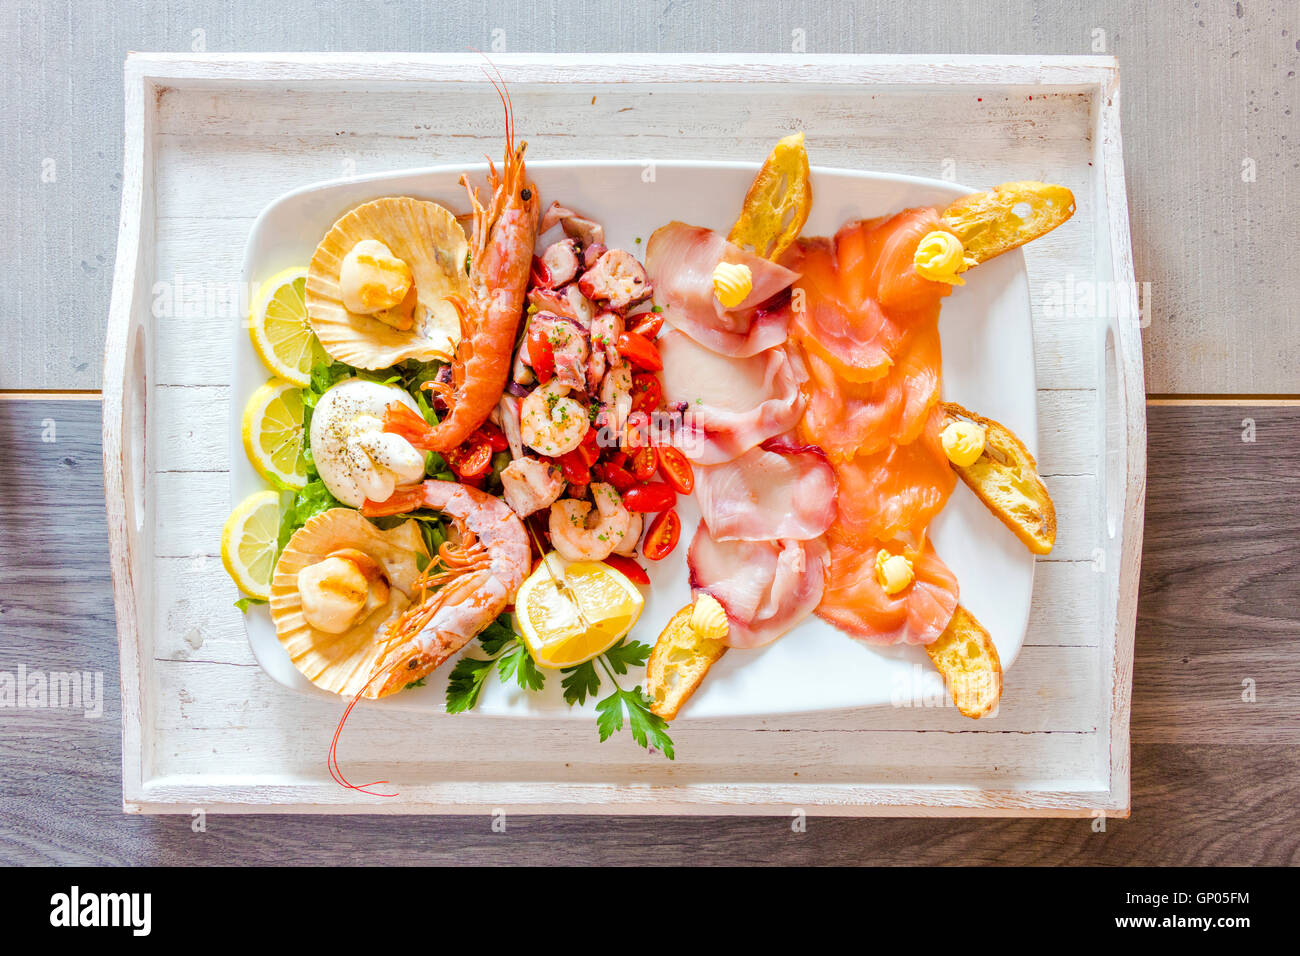 Fresh crayfish with salmon and shrimps served with vegetables a healthy dish typical of Italian cuisine Stock Photo